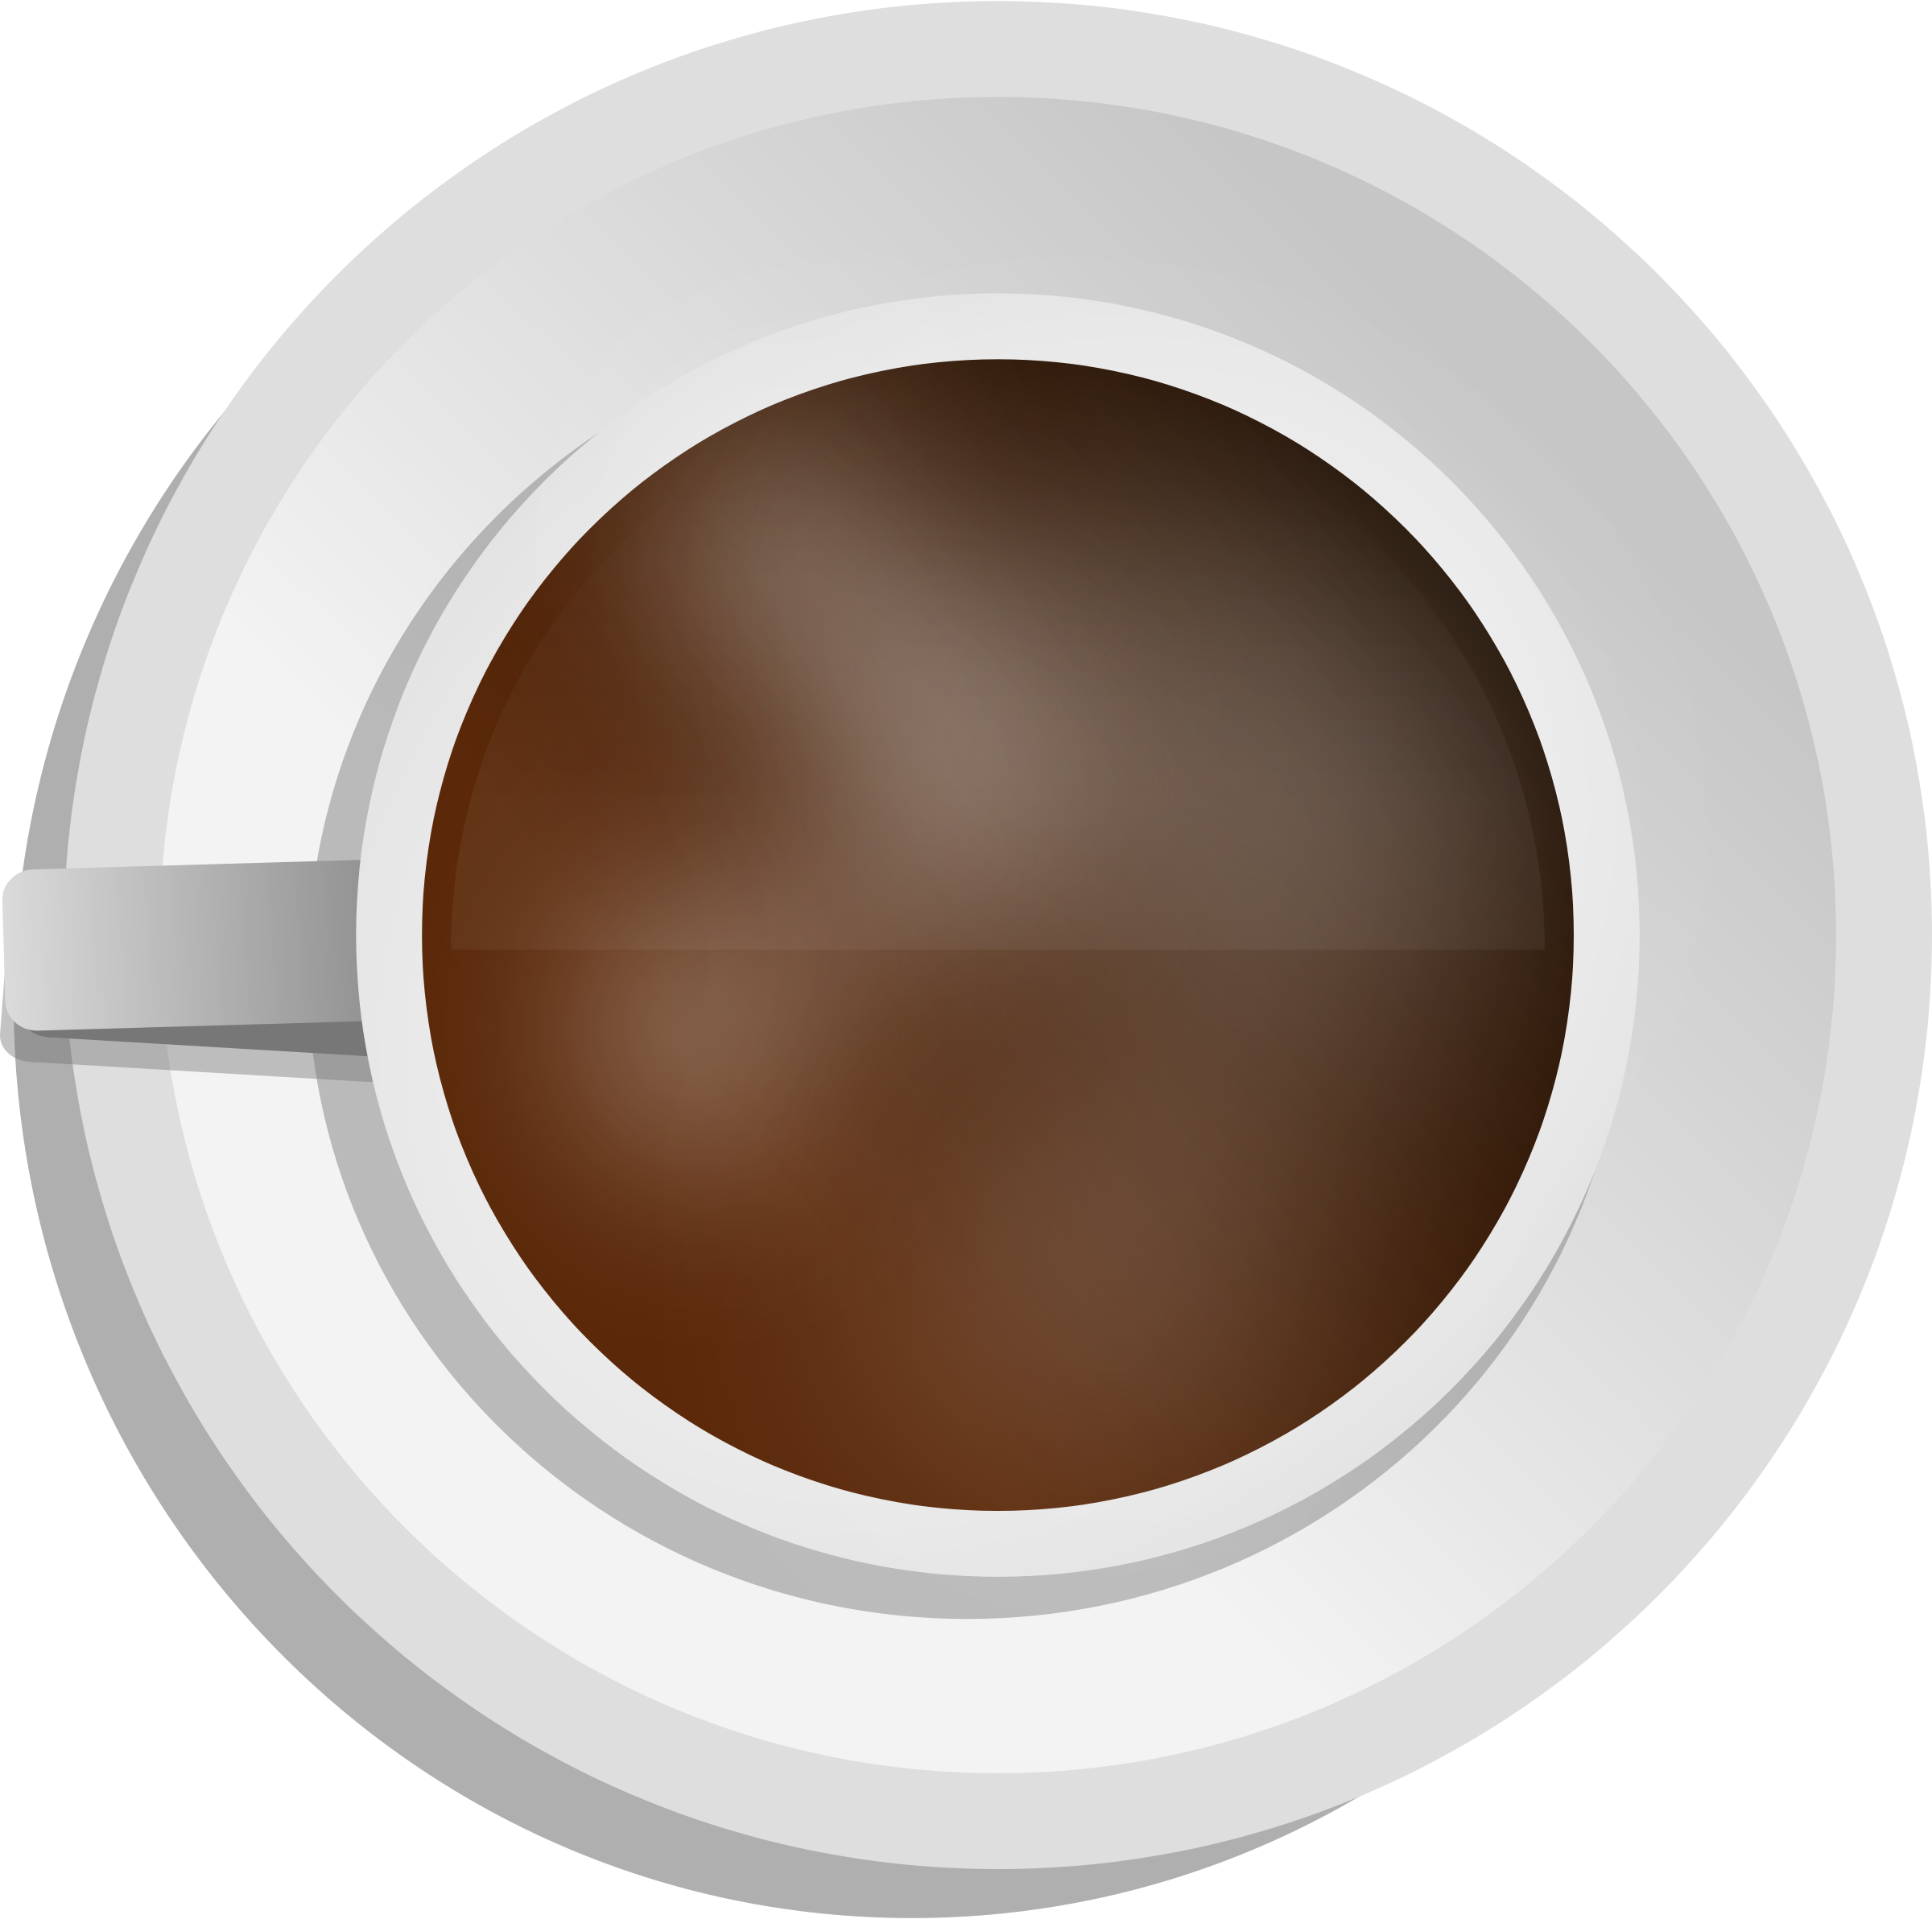 Clipart - Realistic Coffee cup - Top view